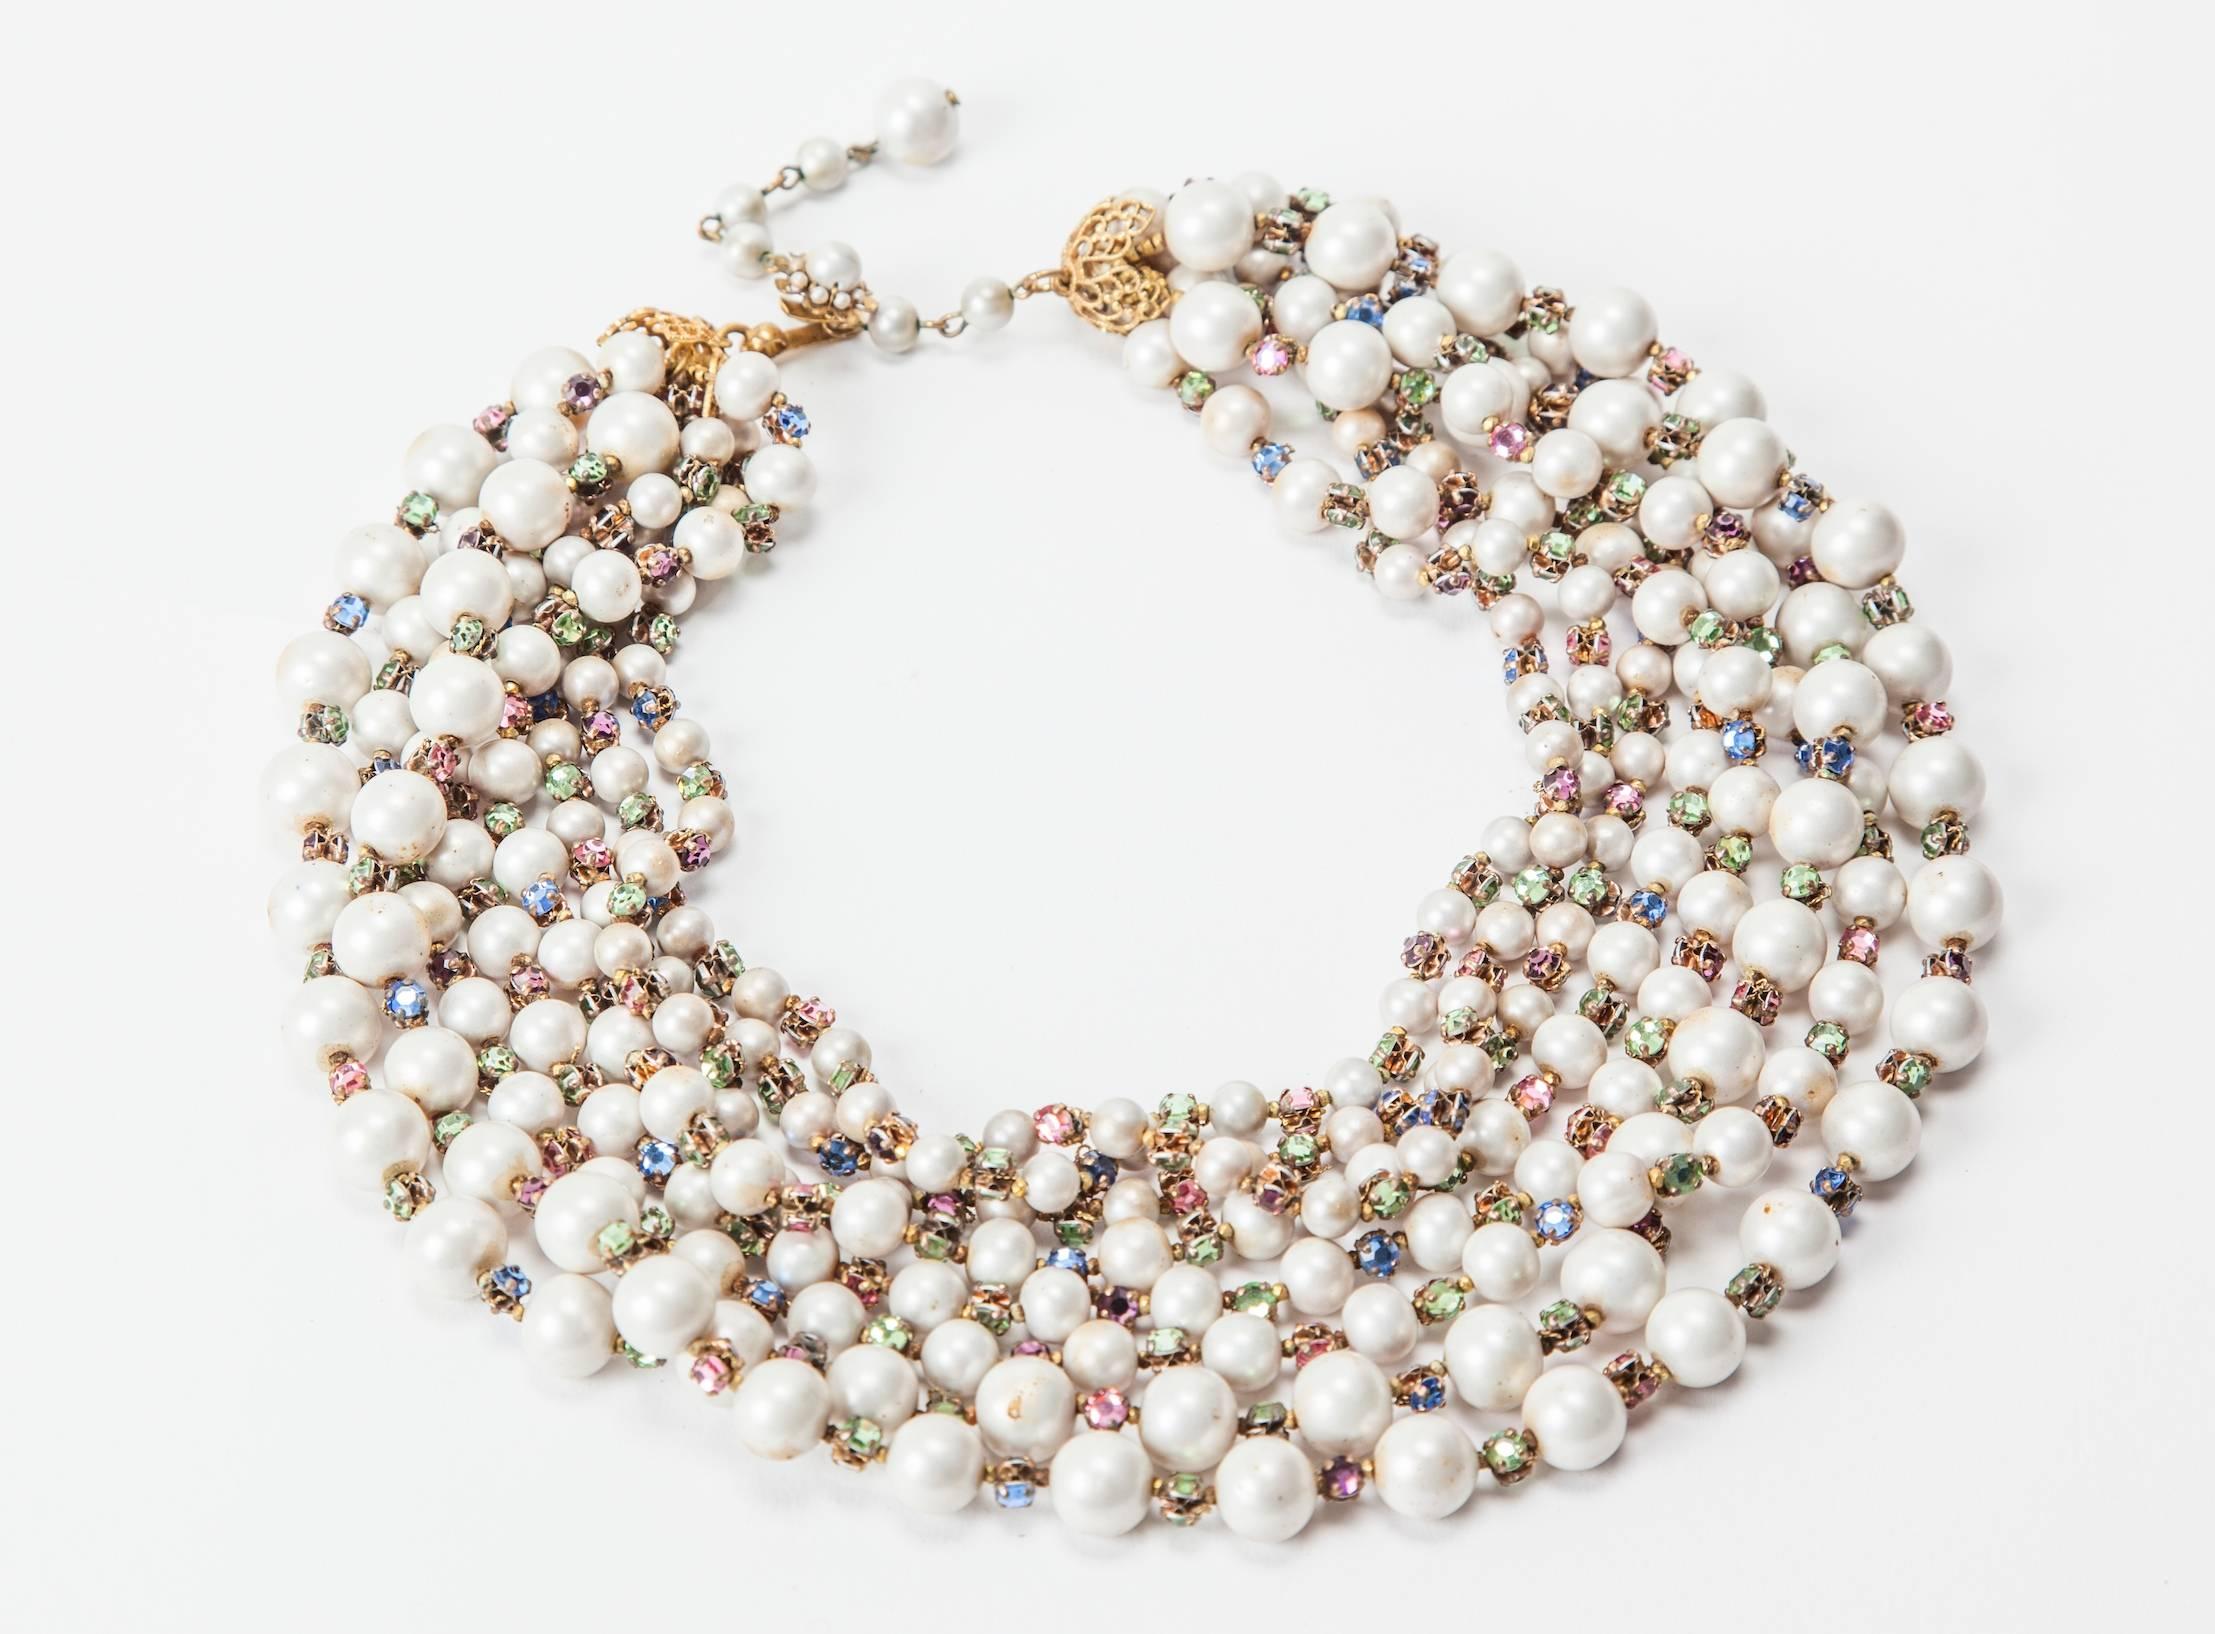 Wonderful Miriam Haskell eight strand draped necklace of signature Freshwater faux pearls. Each freshwater pearl bead spaced by hand sewn, vari colored pastel  rose monte crystals.The staggered strands terminate in signature Russian Gilt filigree